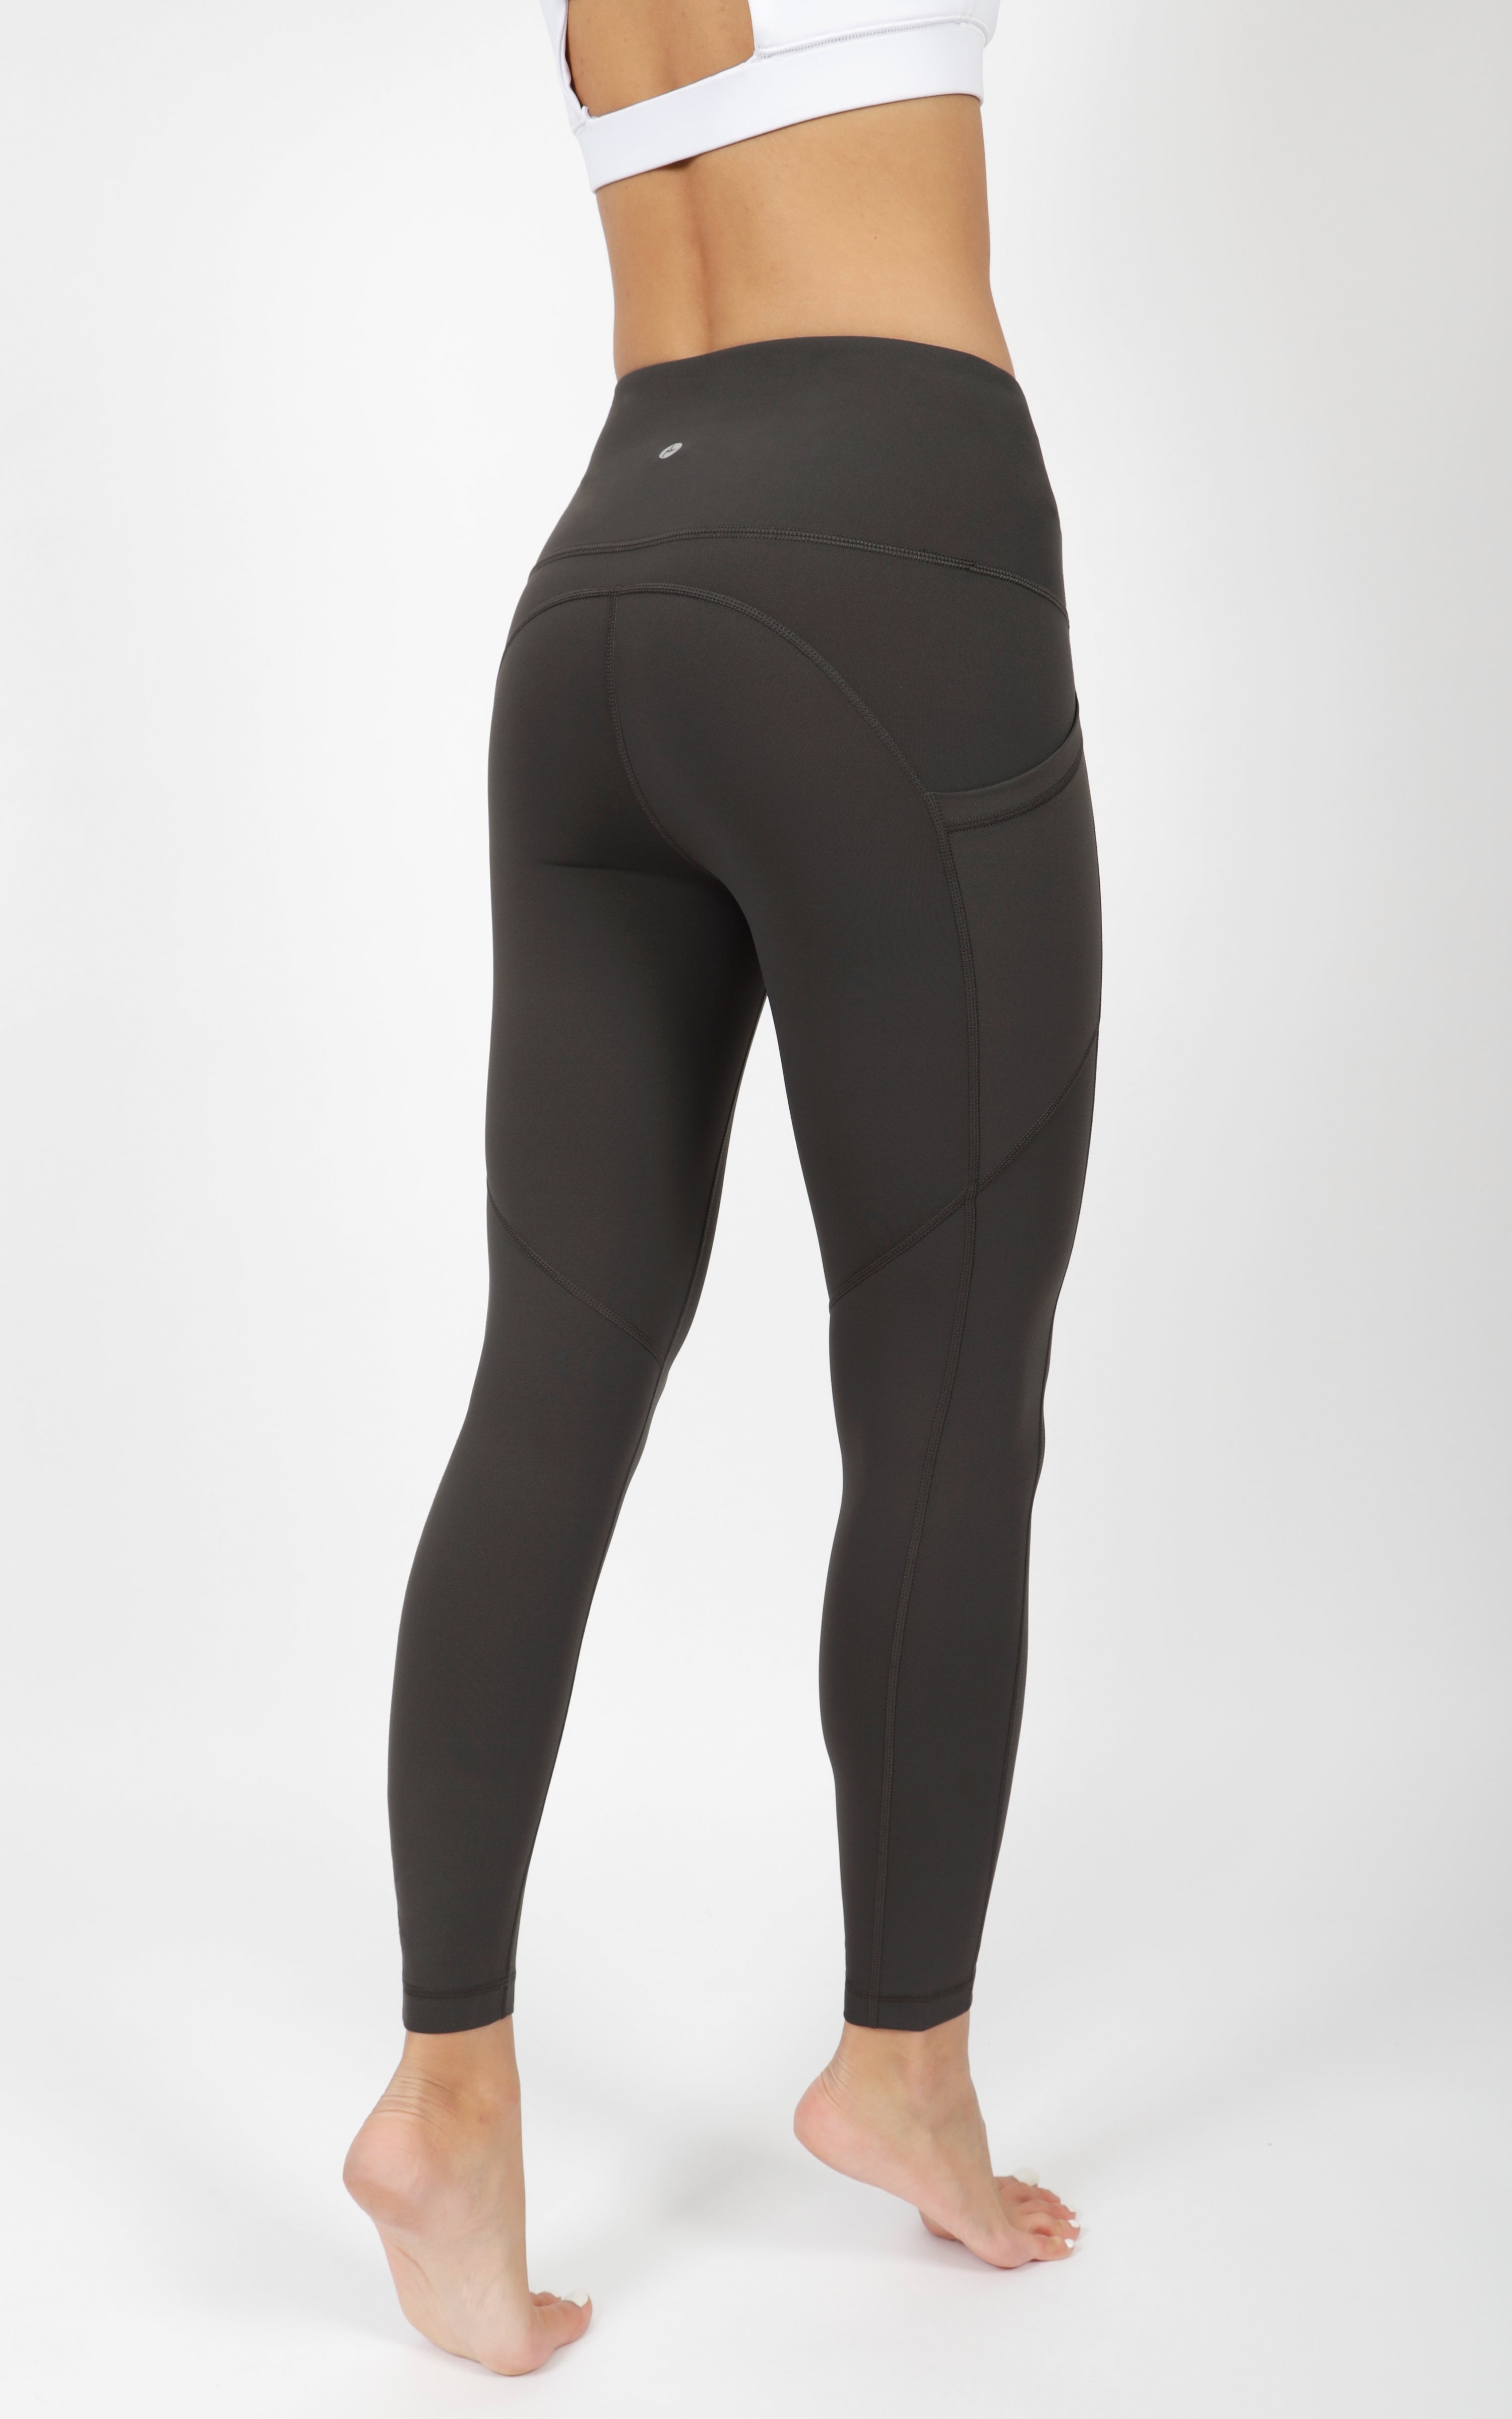 8 best squat proof leggings - tried and tested - Healthista